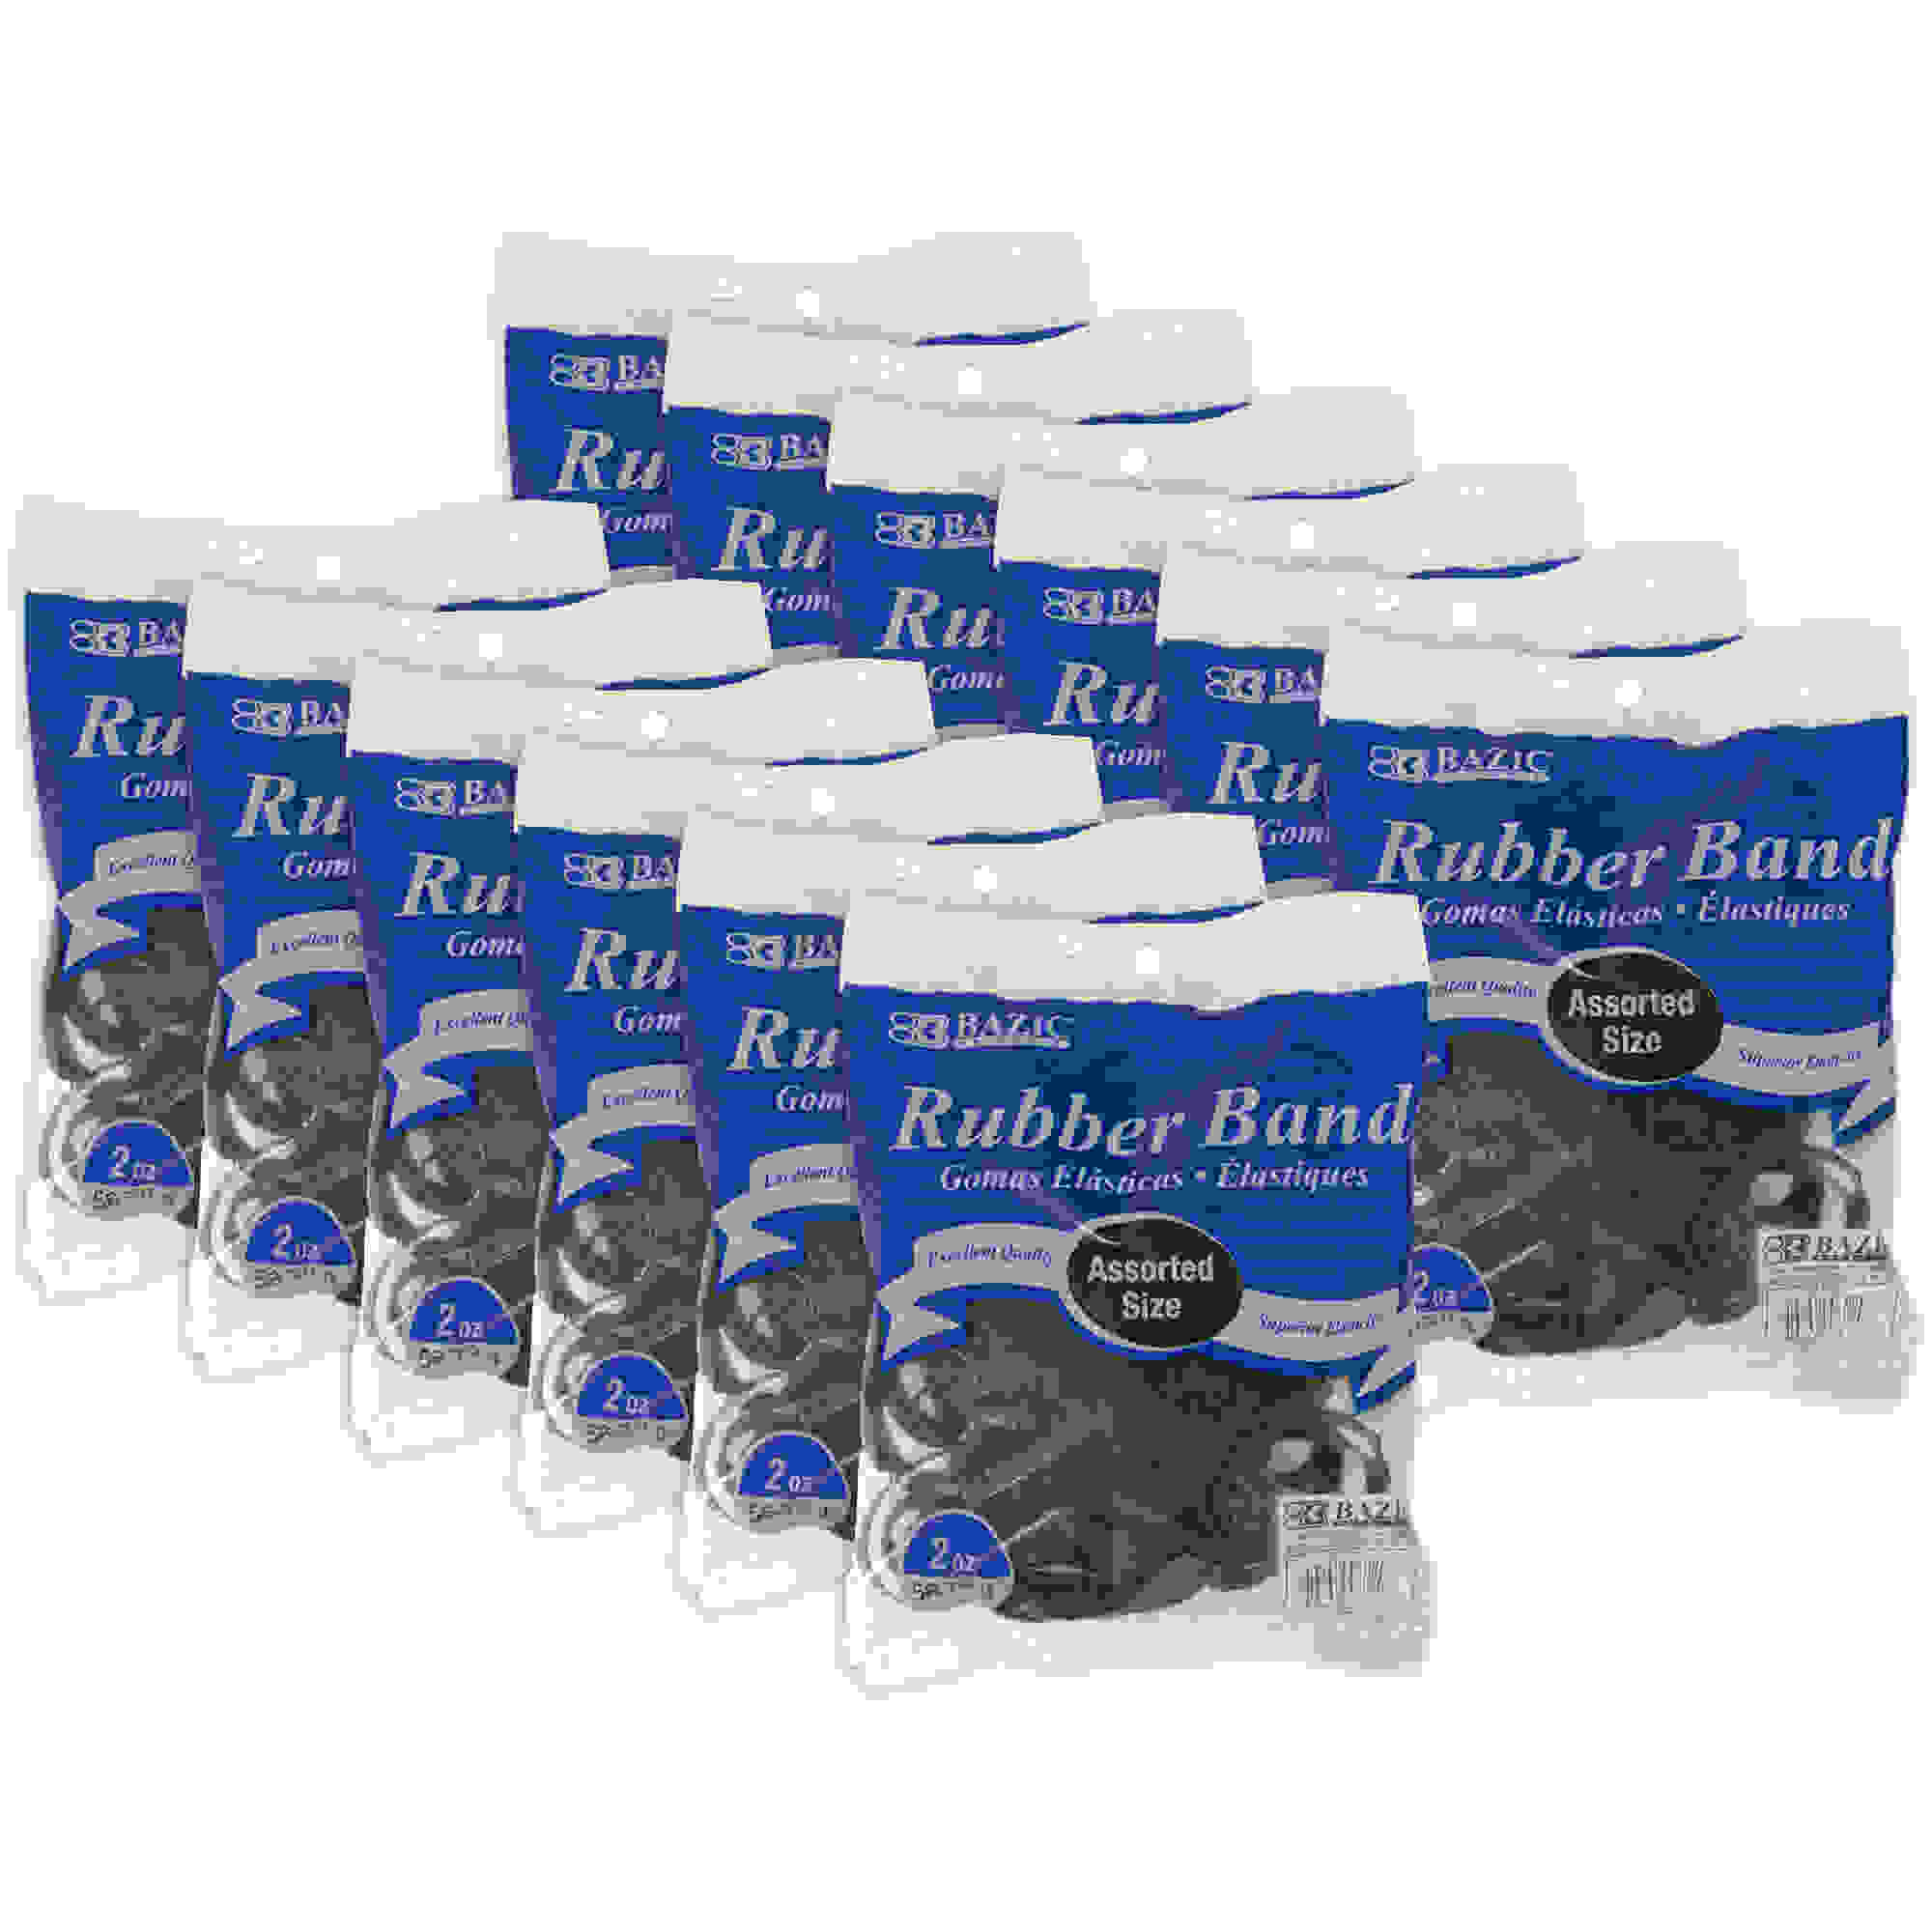 Rubber Bands, Assorted Sizes, Black, 2 oz./56.70 g Per Pack, 12 Packs